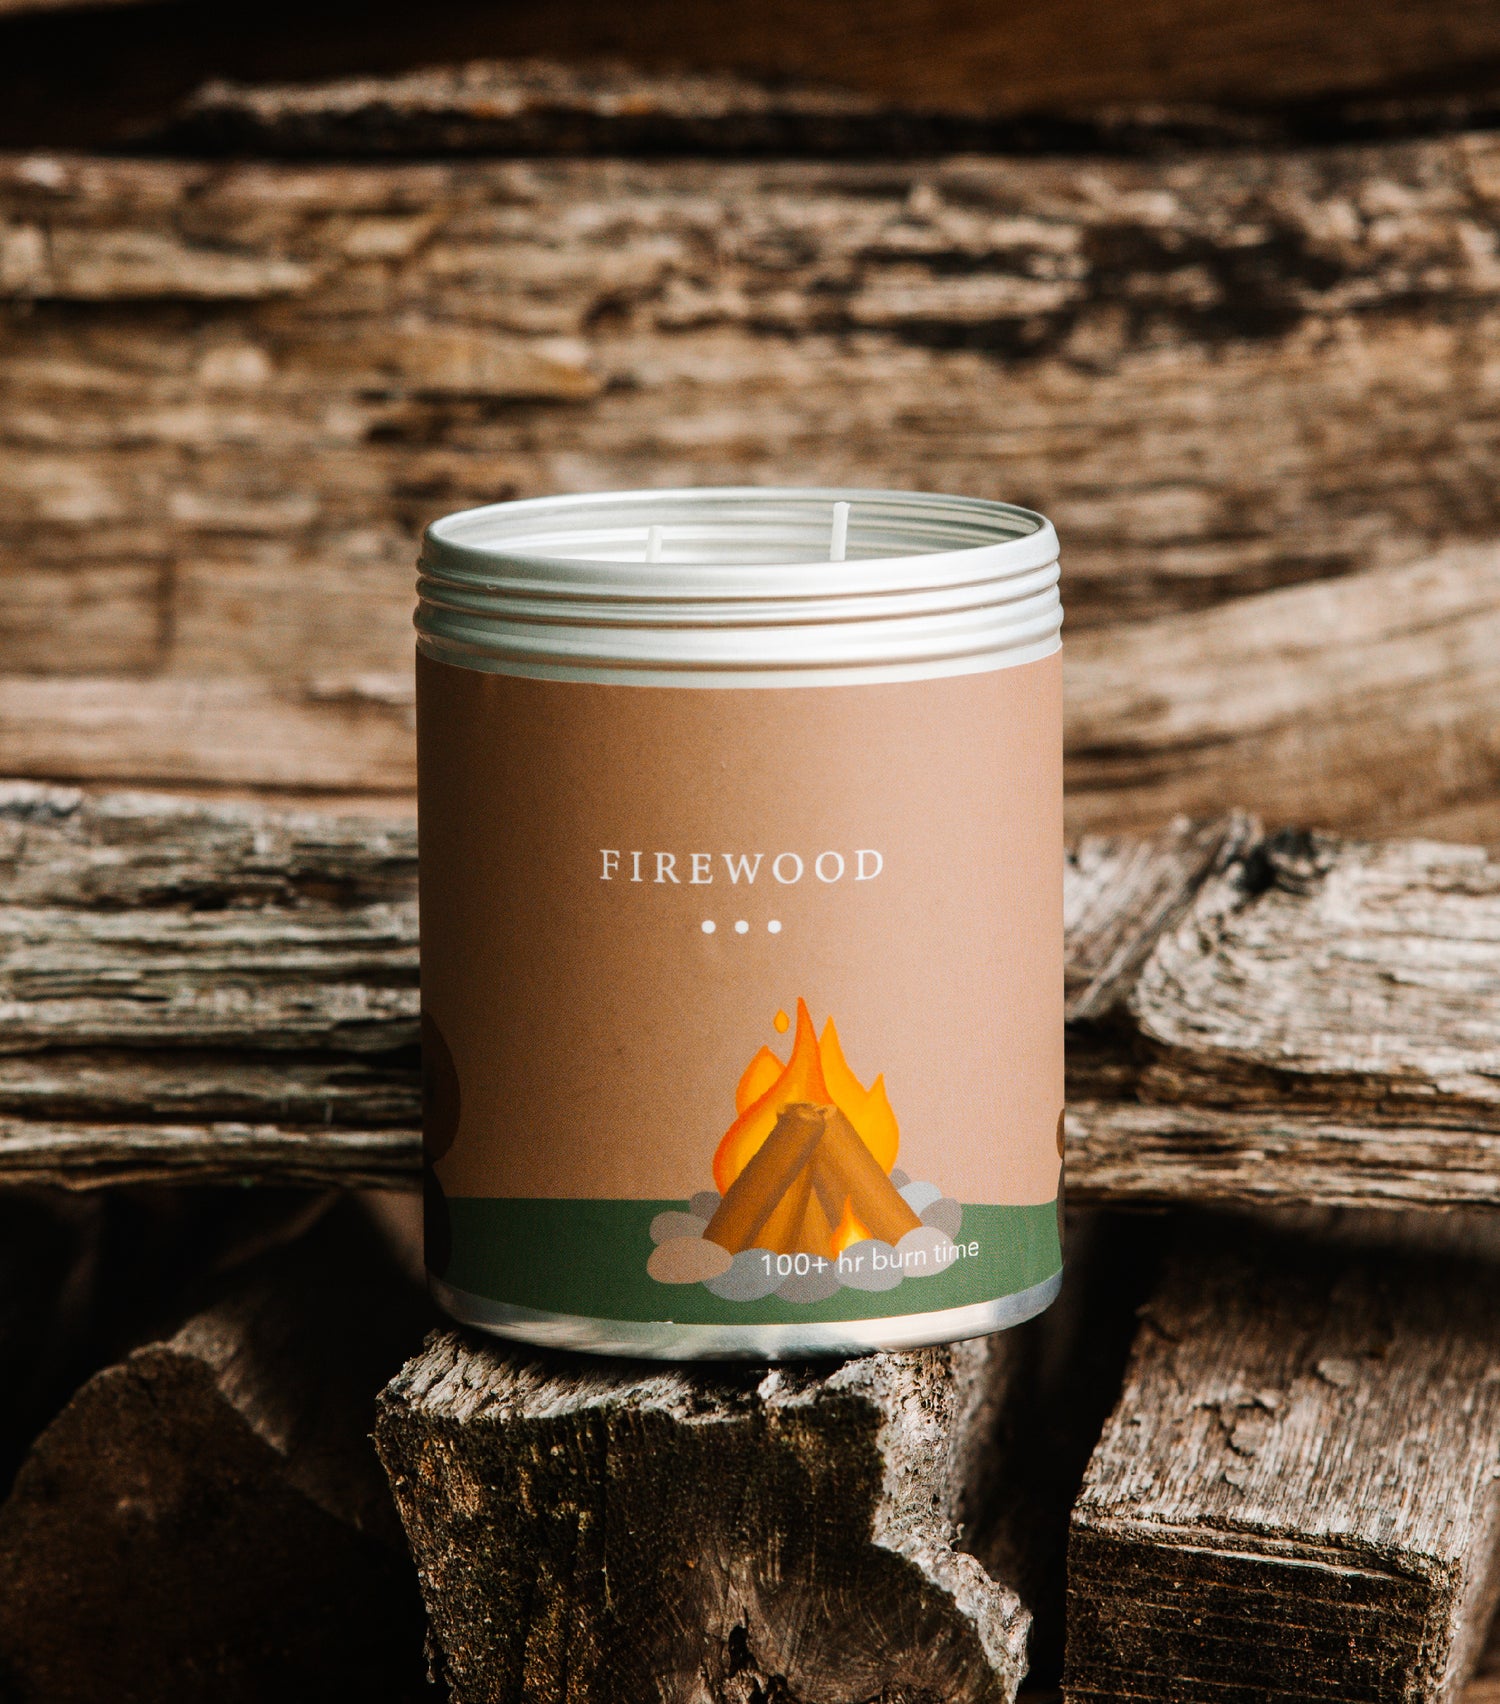 A Large brown tin with an image of a roaring campfire on the side. Made in Kalamazoo, MI USA. Scented with Gilded Spices, Fir Needle, and Smokey Vetiver.